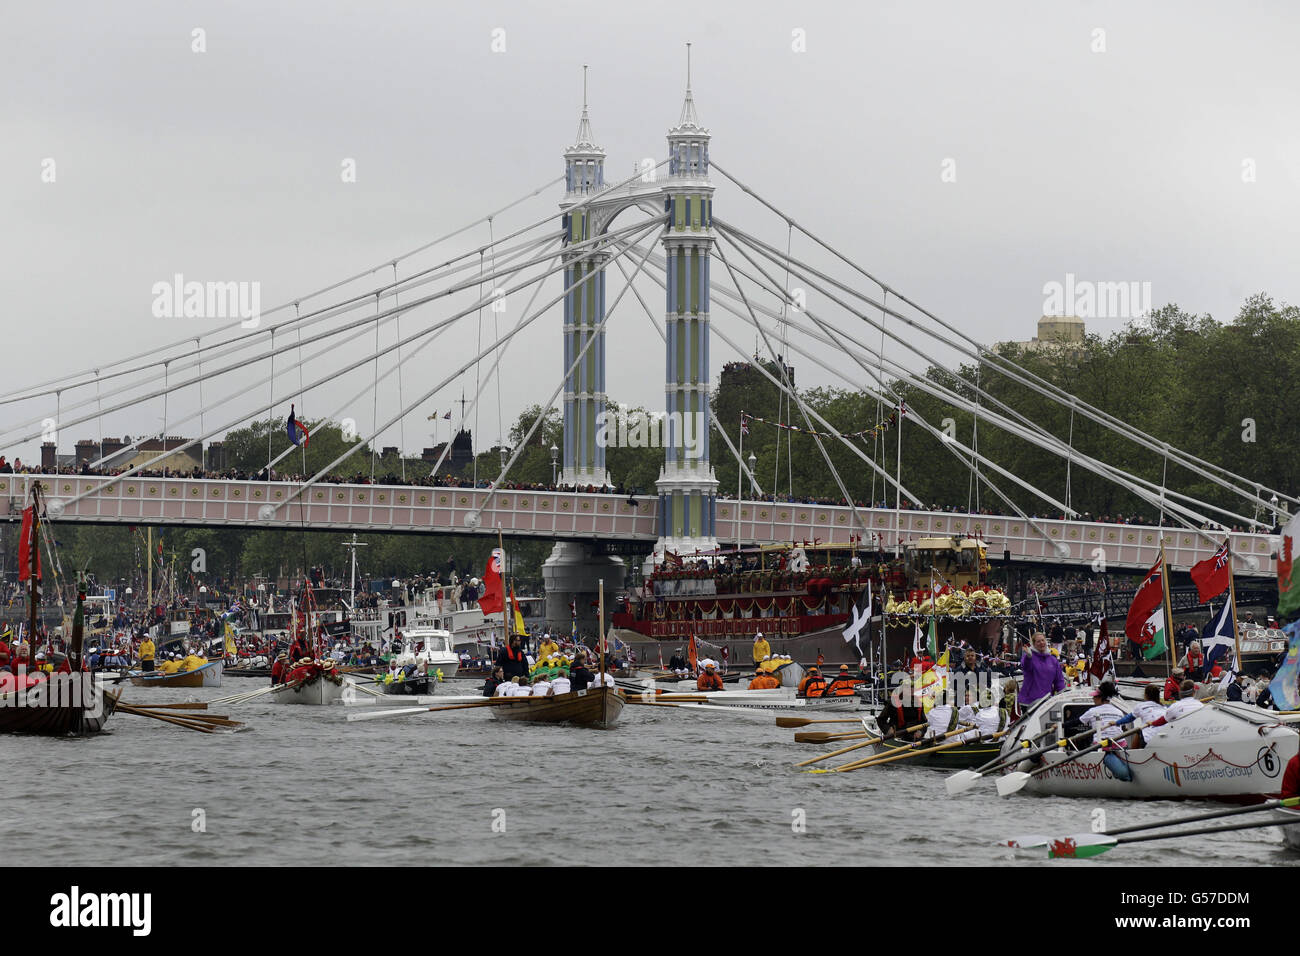 Boats pass the Royal Barge at Putney Bridge as they head towards Tower Bridge along the River Thames, during the Diamond Jubilee River Pageant, in London. Stock Photo